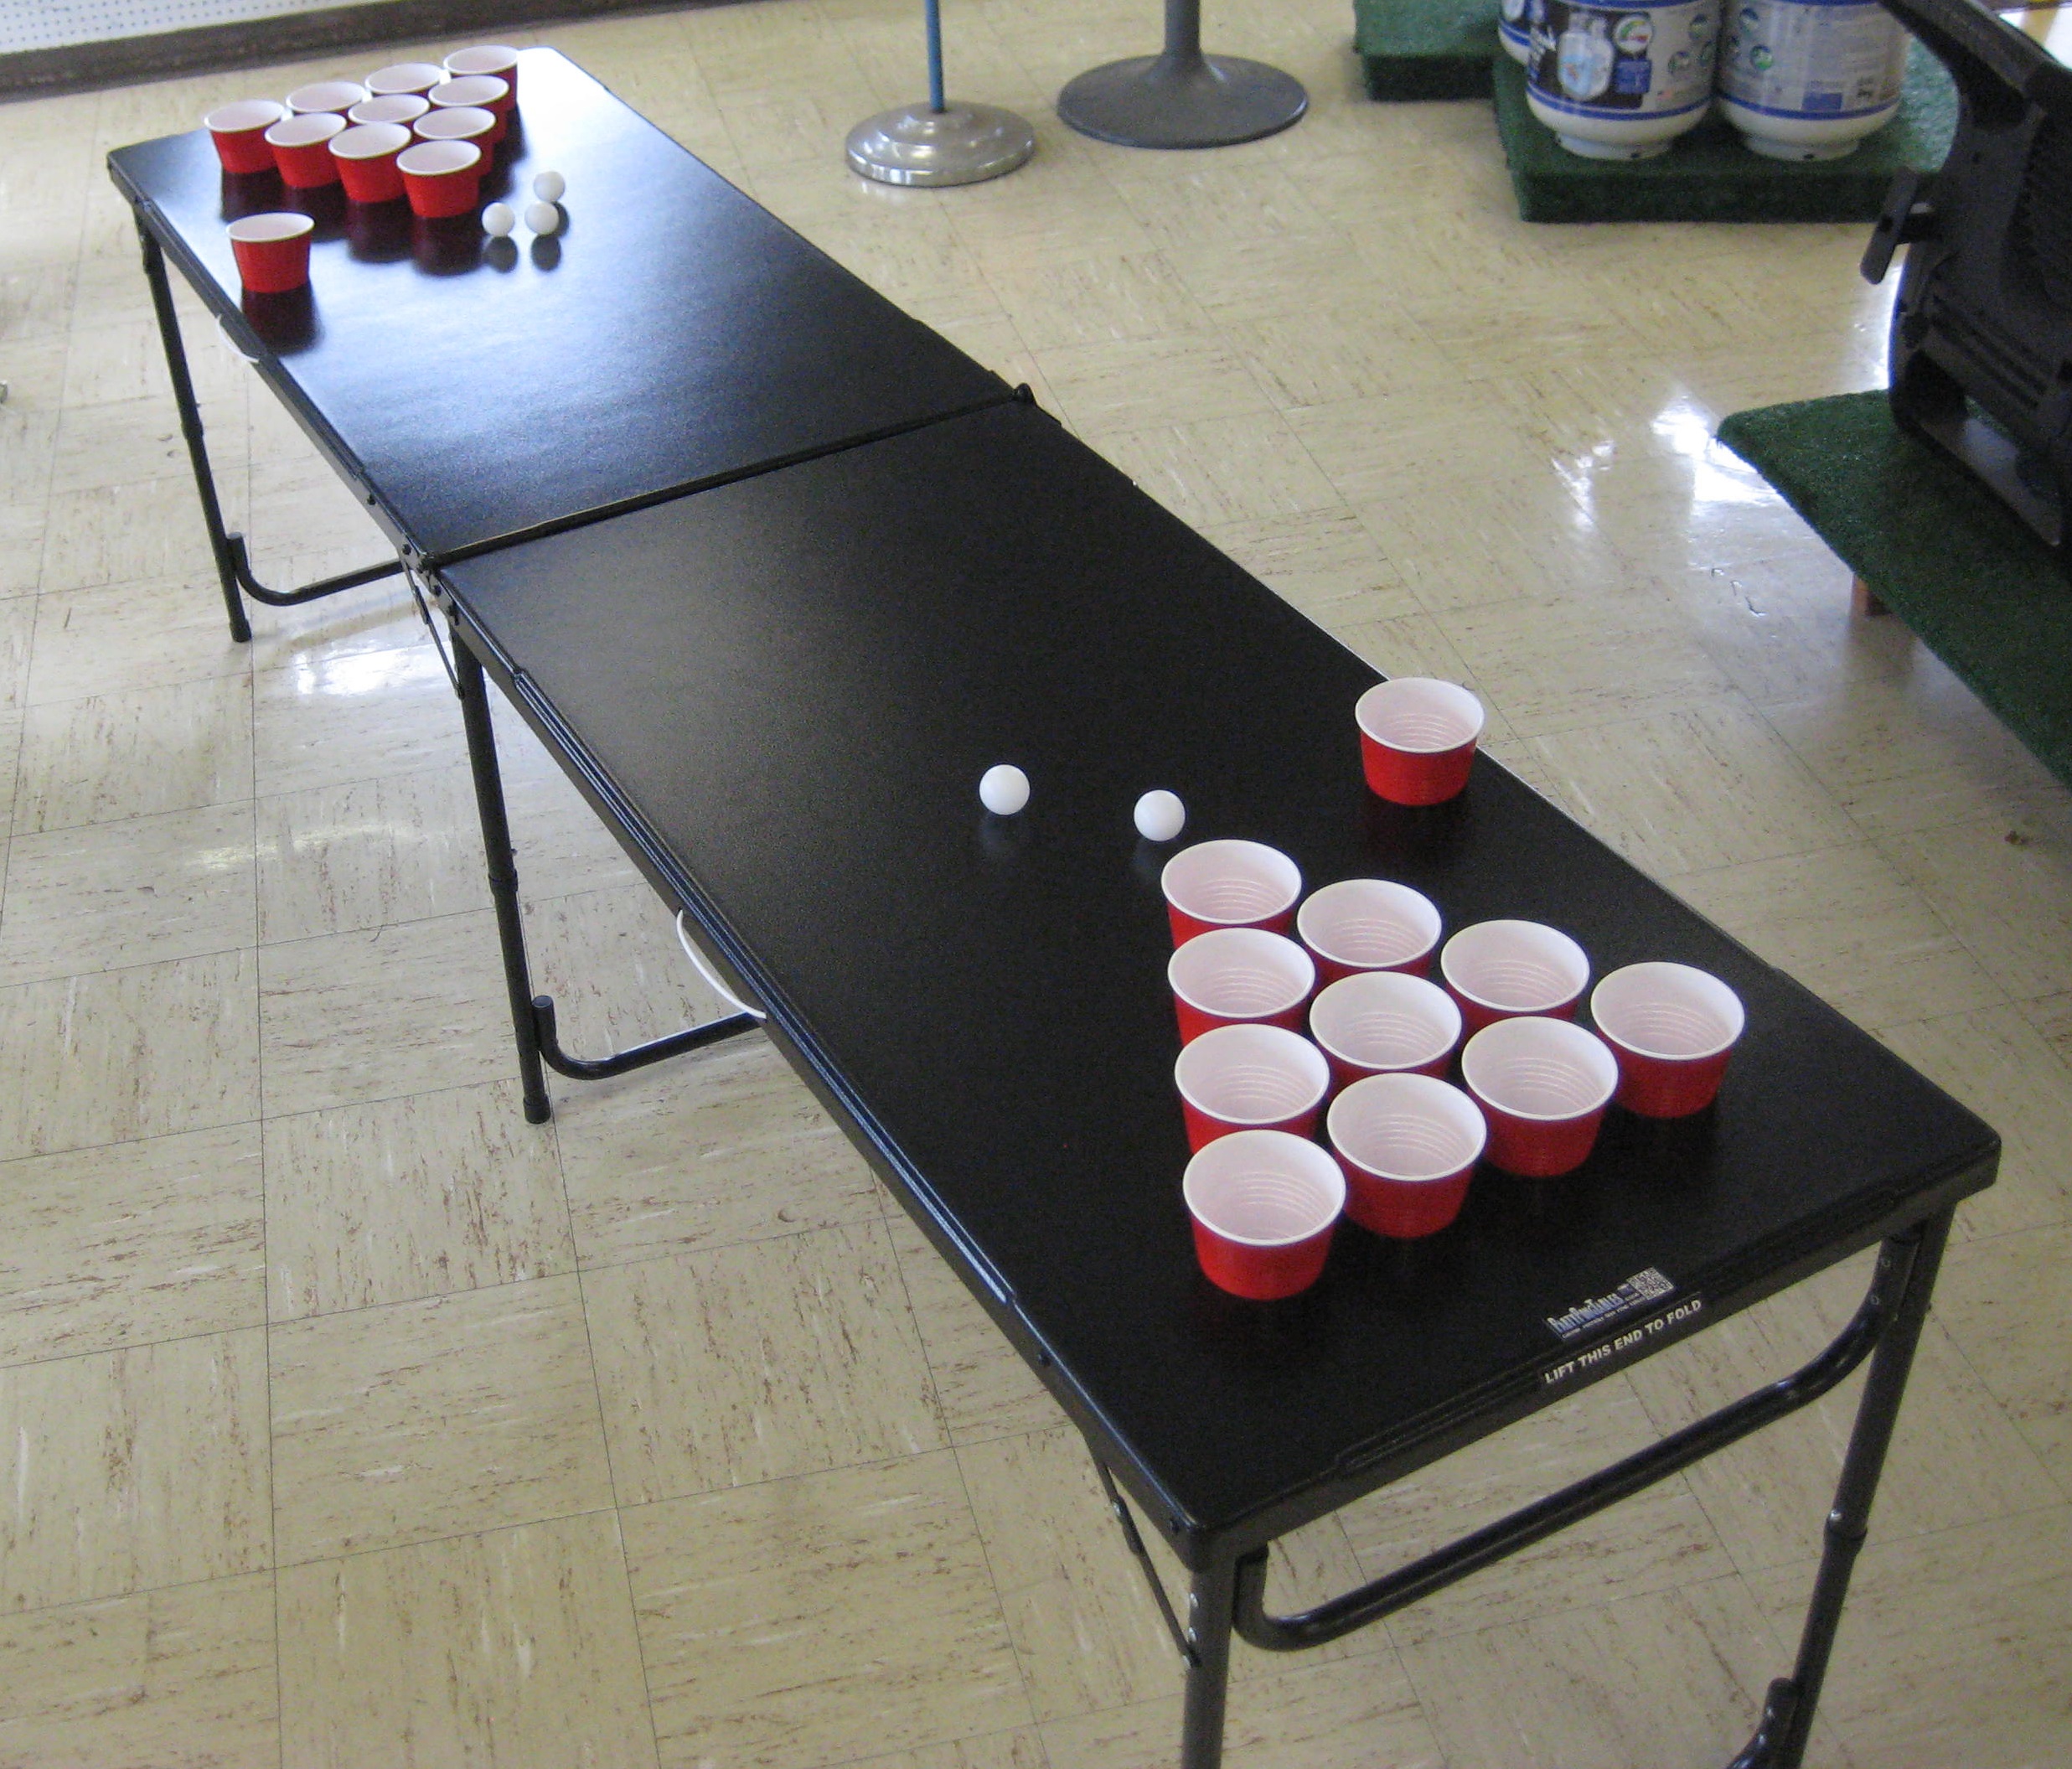 wooden-beer-pong-table-cheap-sale-save-67-jlcatj-gob-mx